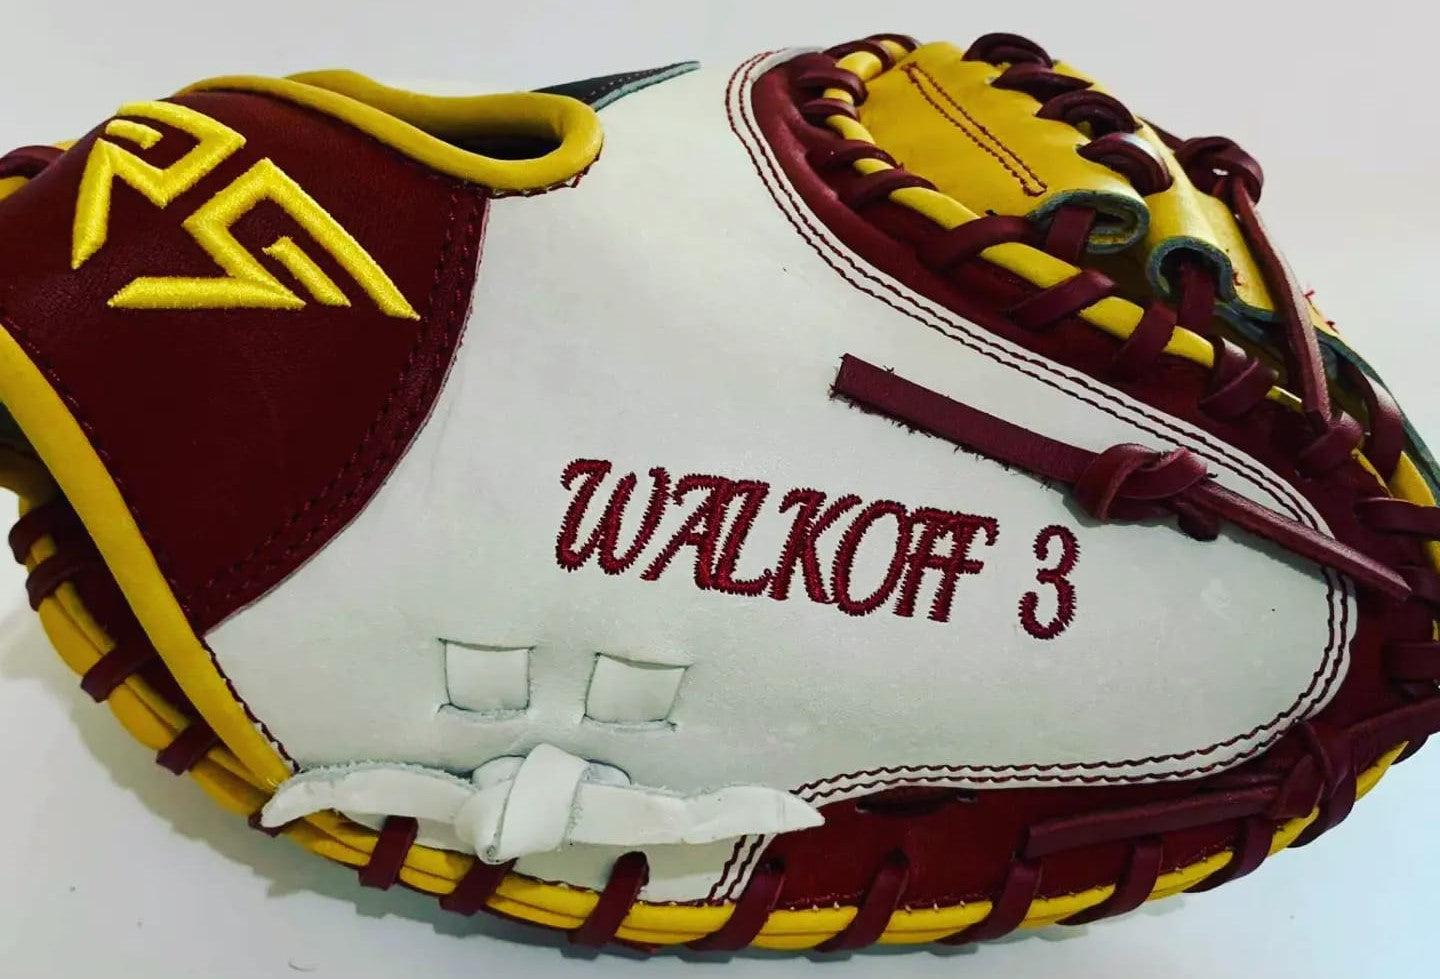 The Catch: Made-to-Order Baseball Gloves